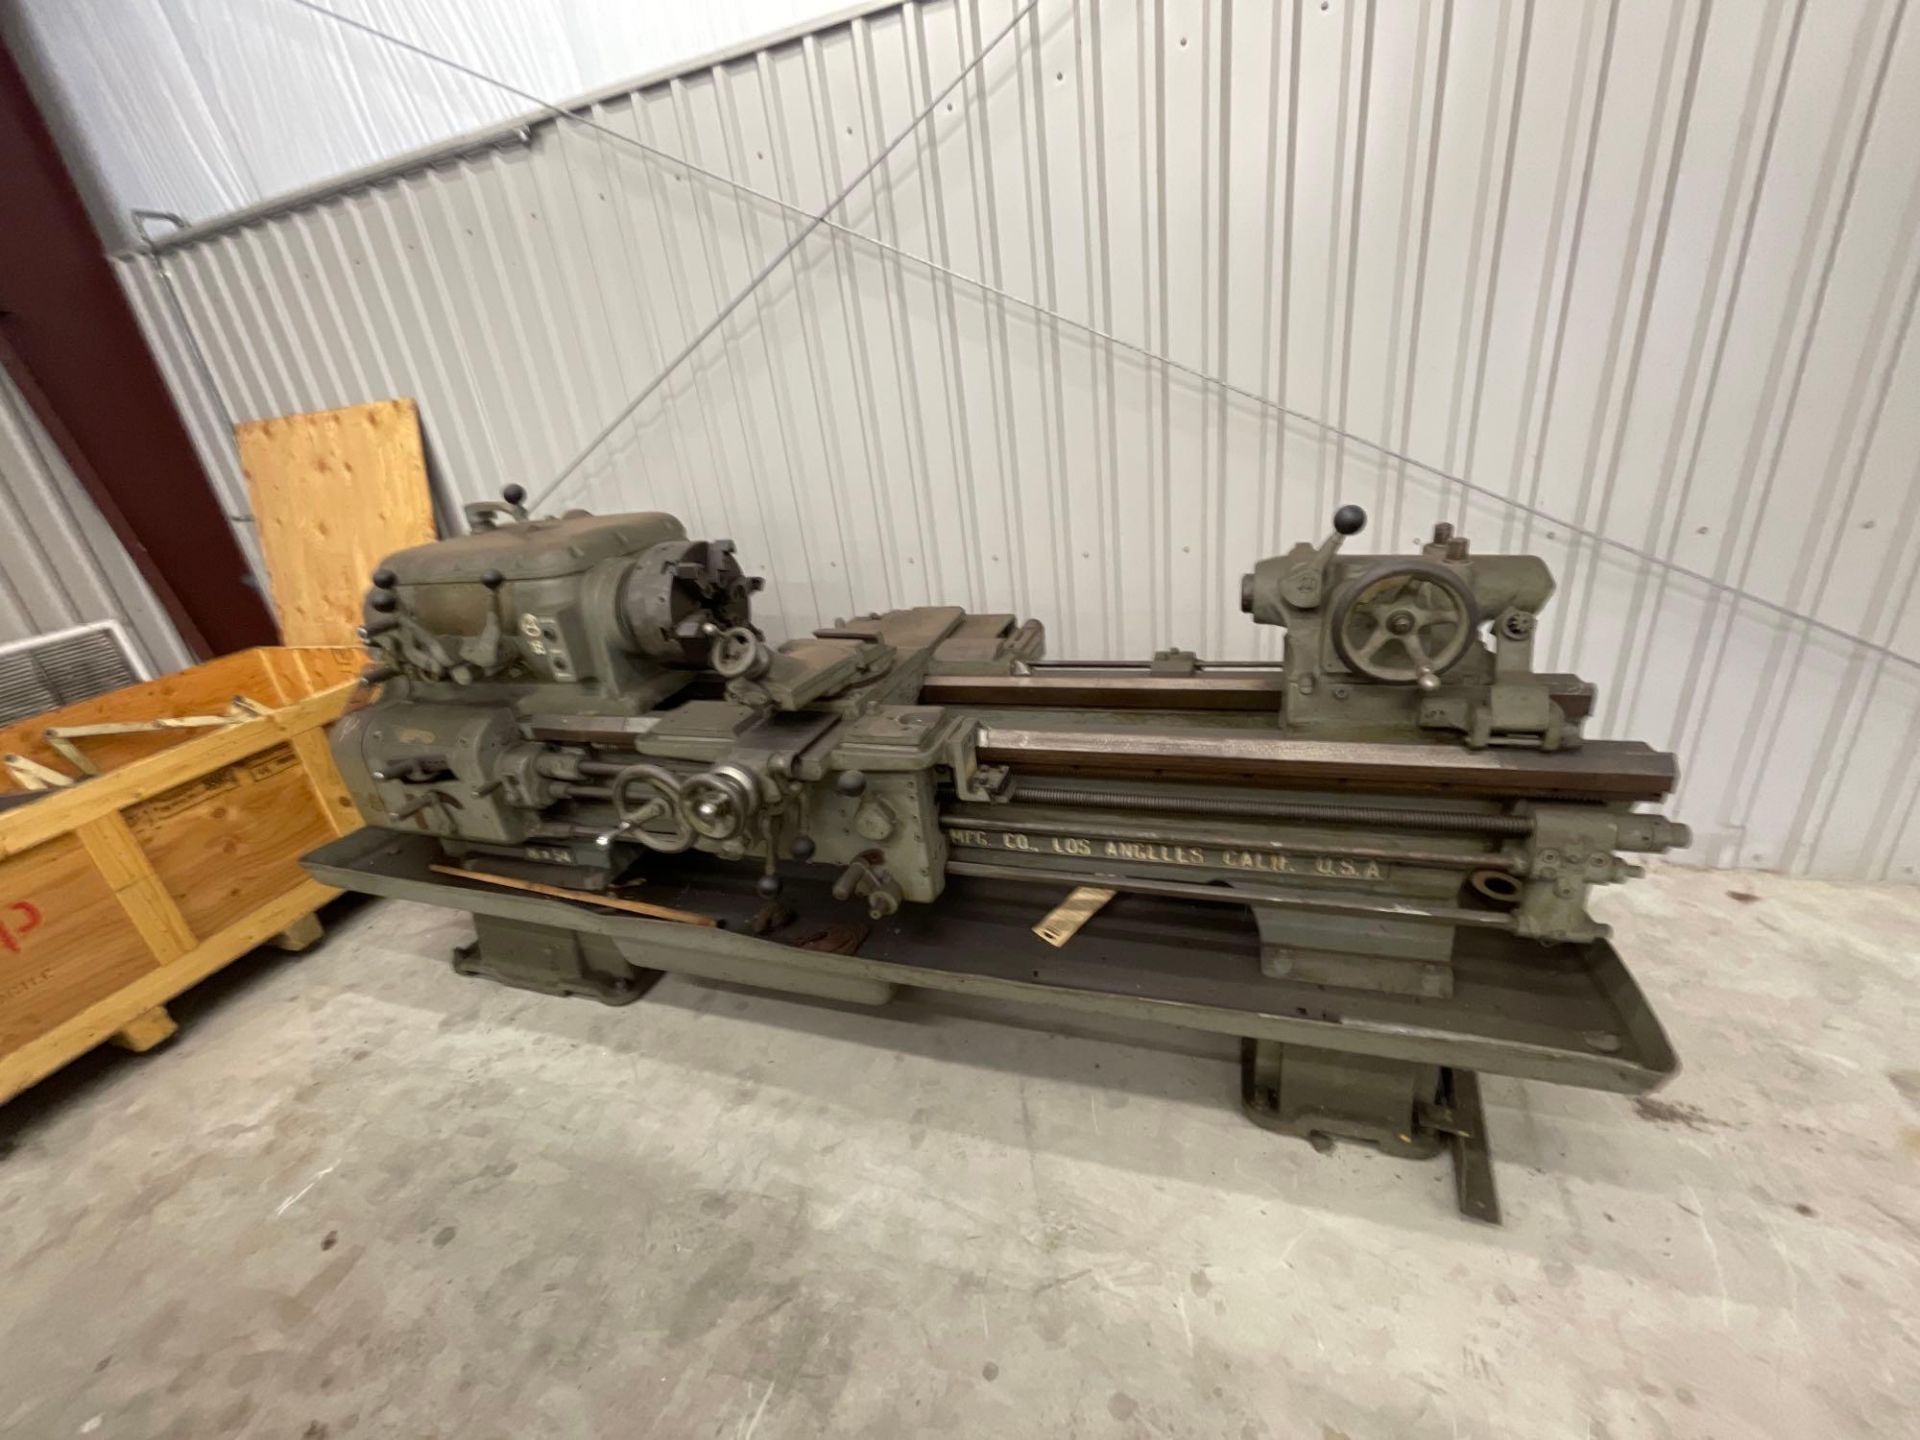 Axelson 16 Lathe, S/N 2789 - Image 2 of 7